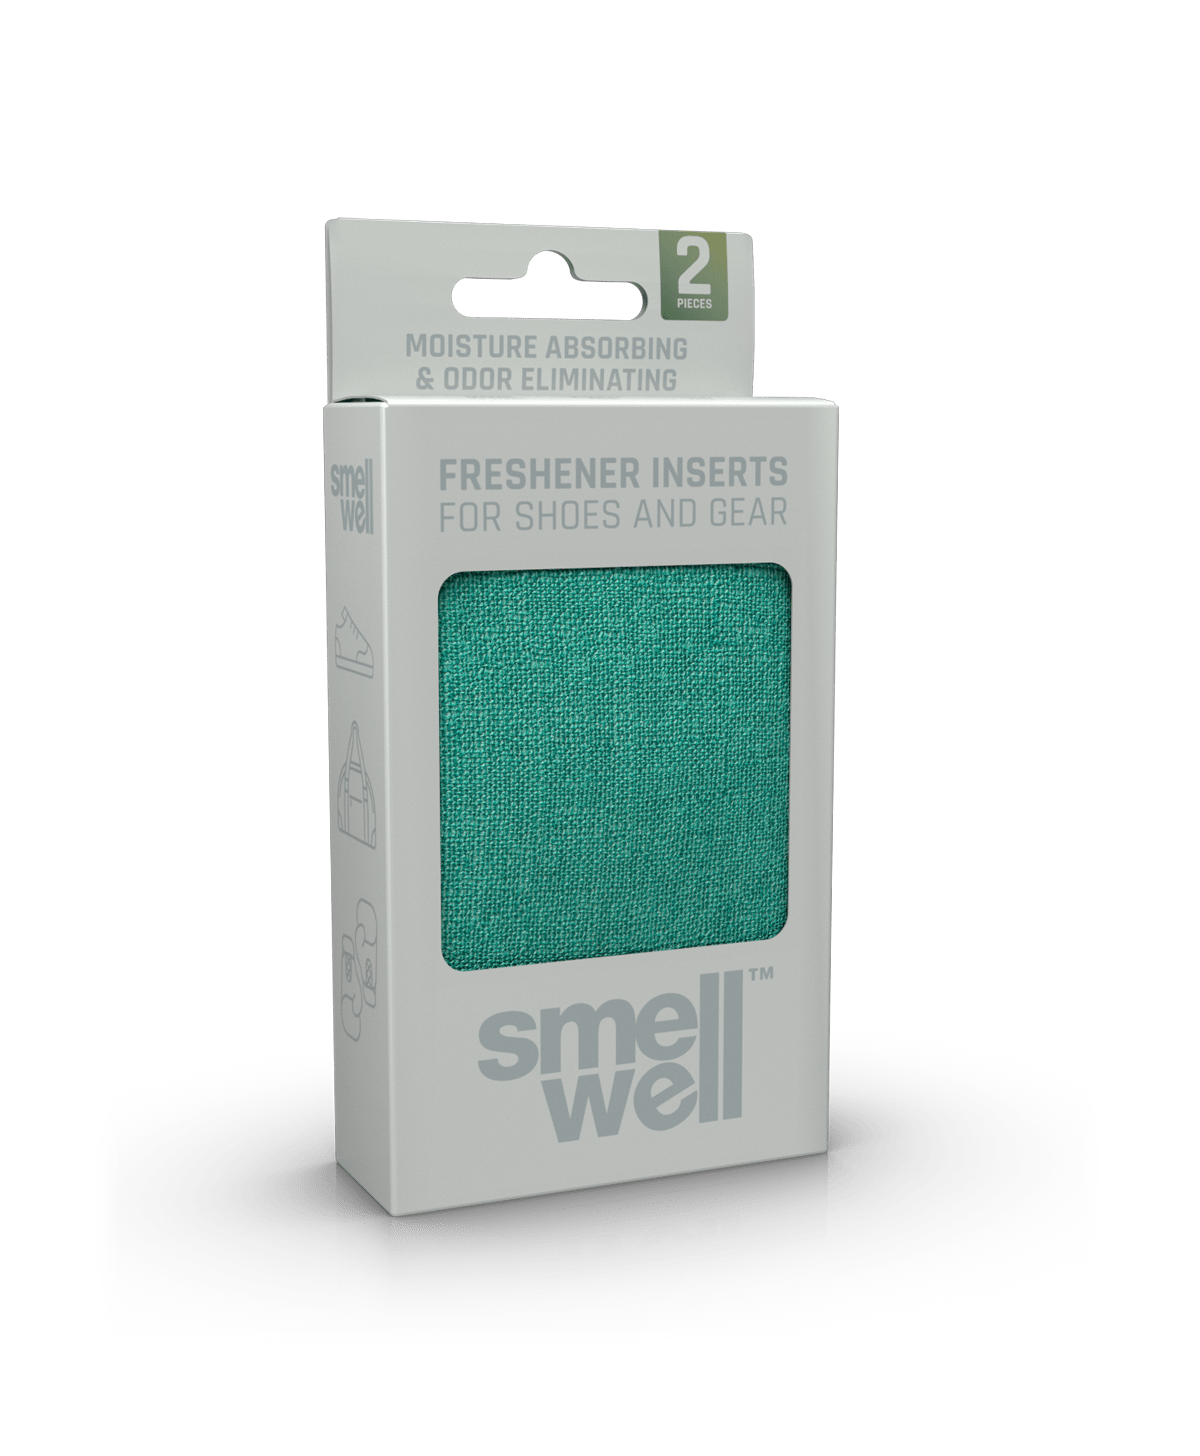 A package of SmellWell Sensitive - Green from an angle